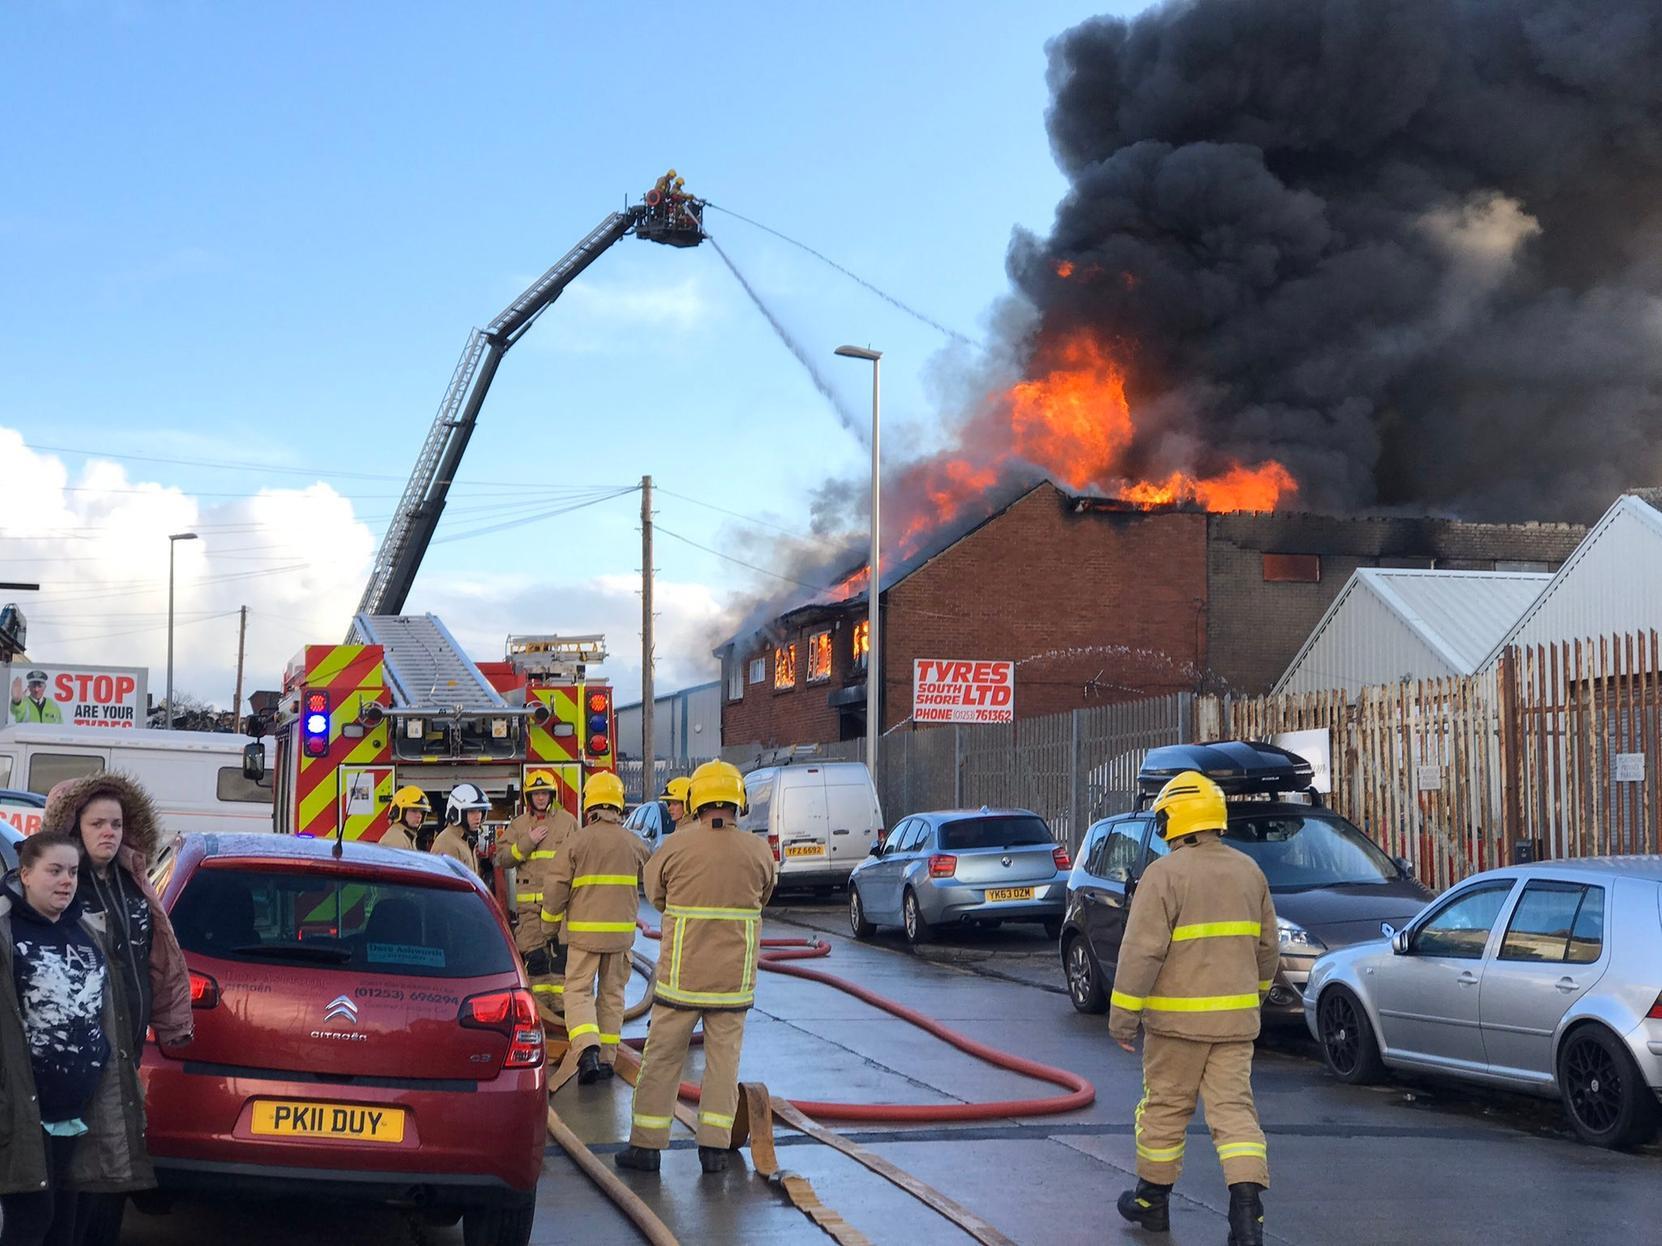 Around 40-50 firefighters, including aerial ladder platforms from Hyndburn and Blackpool, are involved in firefighters efforts. Pic: Stephen Cheatley